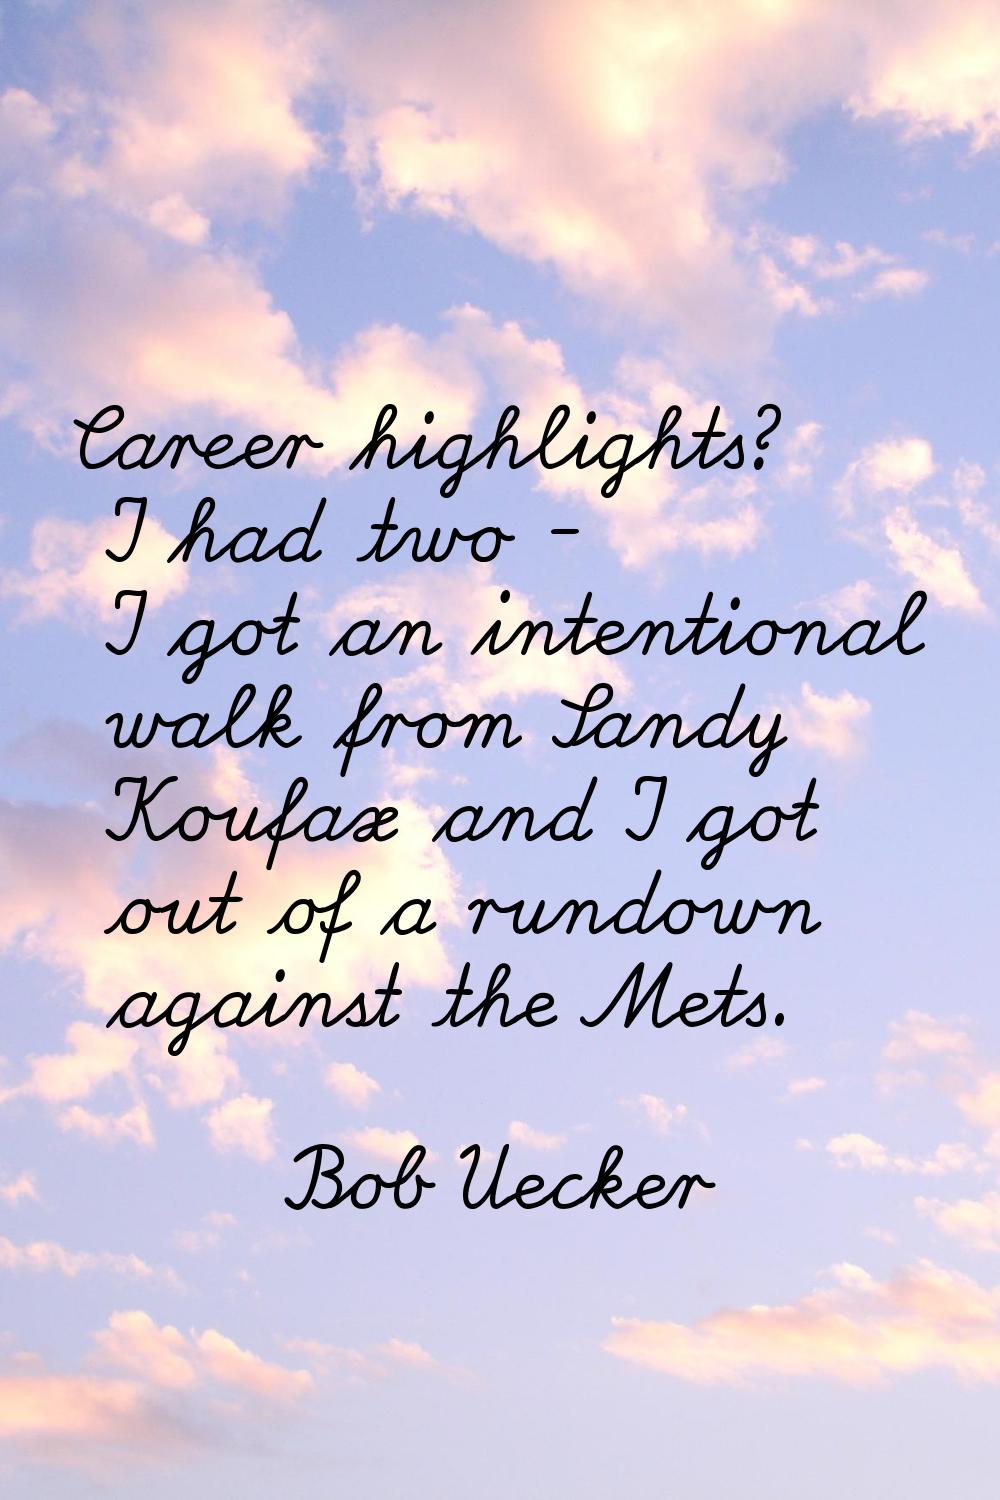 Career highlights? I had two - I got an intentional walk from Sandy Koufax and I got out of a rundo